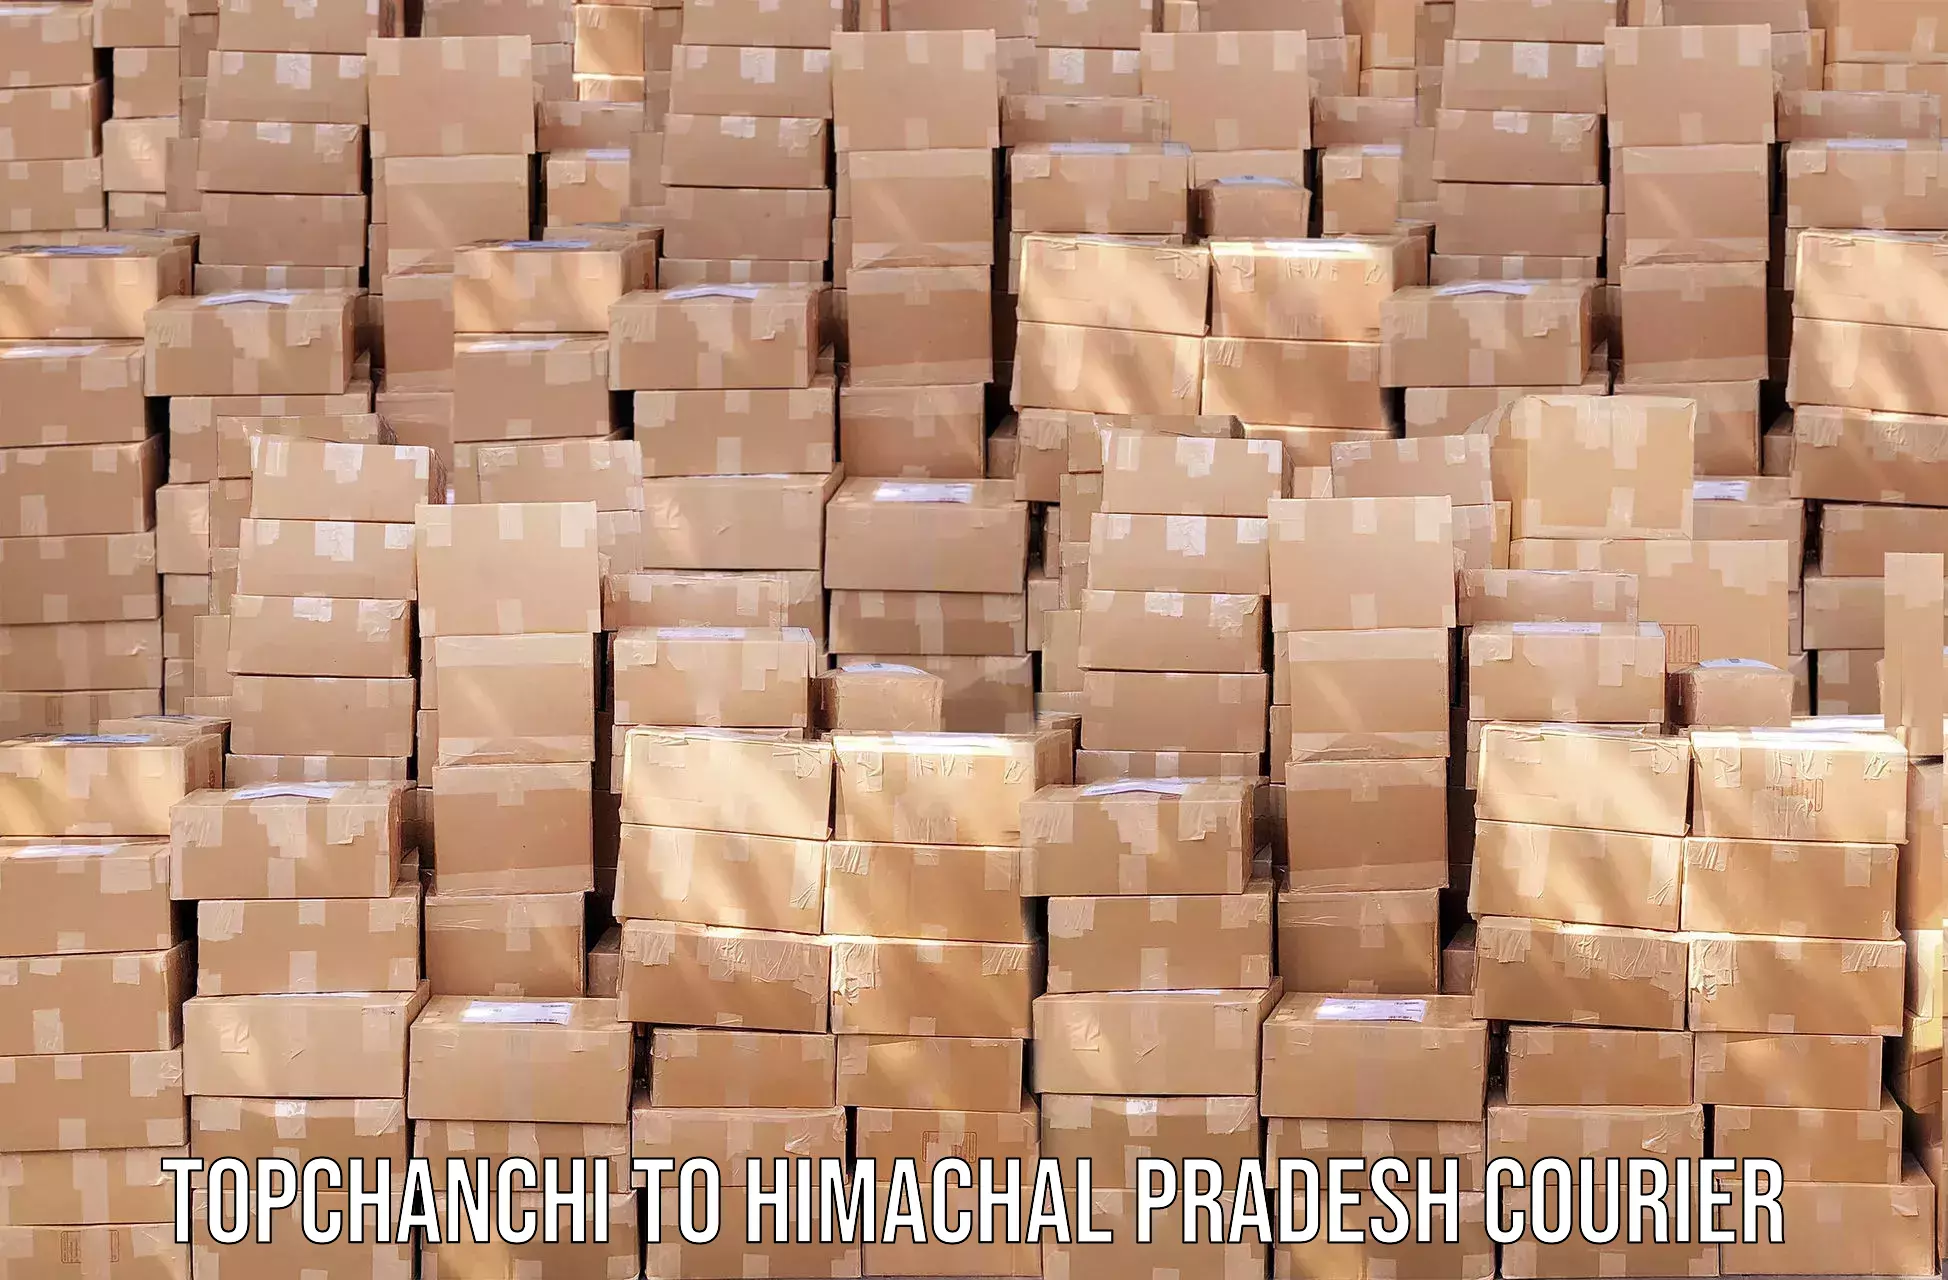 Multi-national courier services Topchanchi to Chintpurni